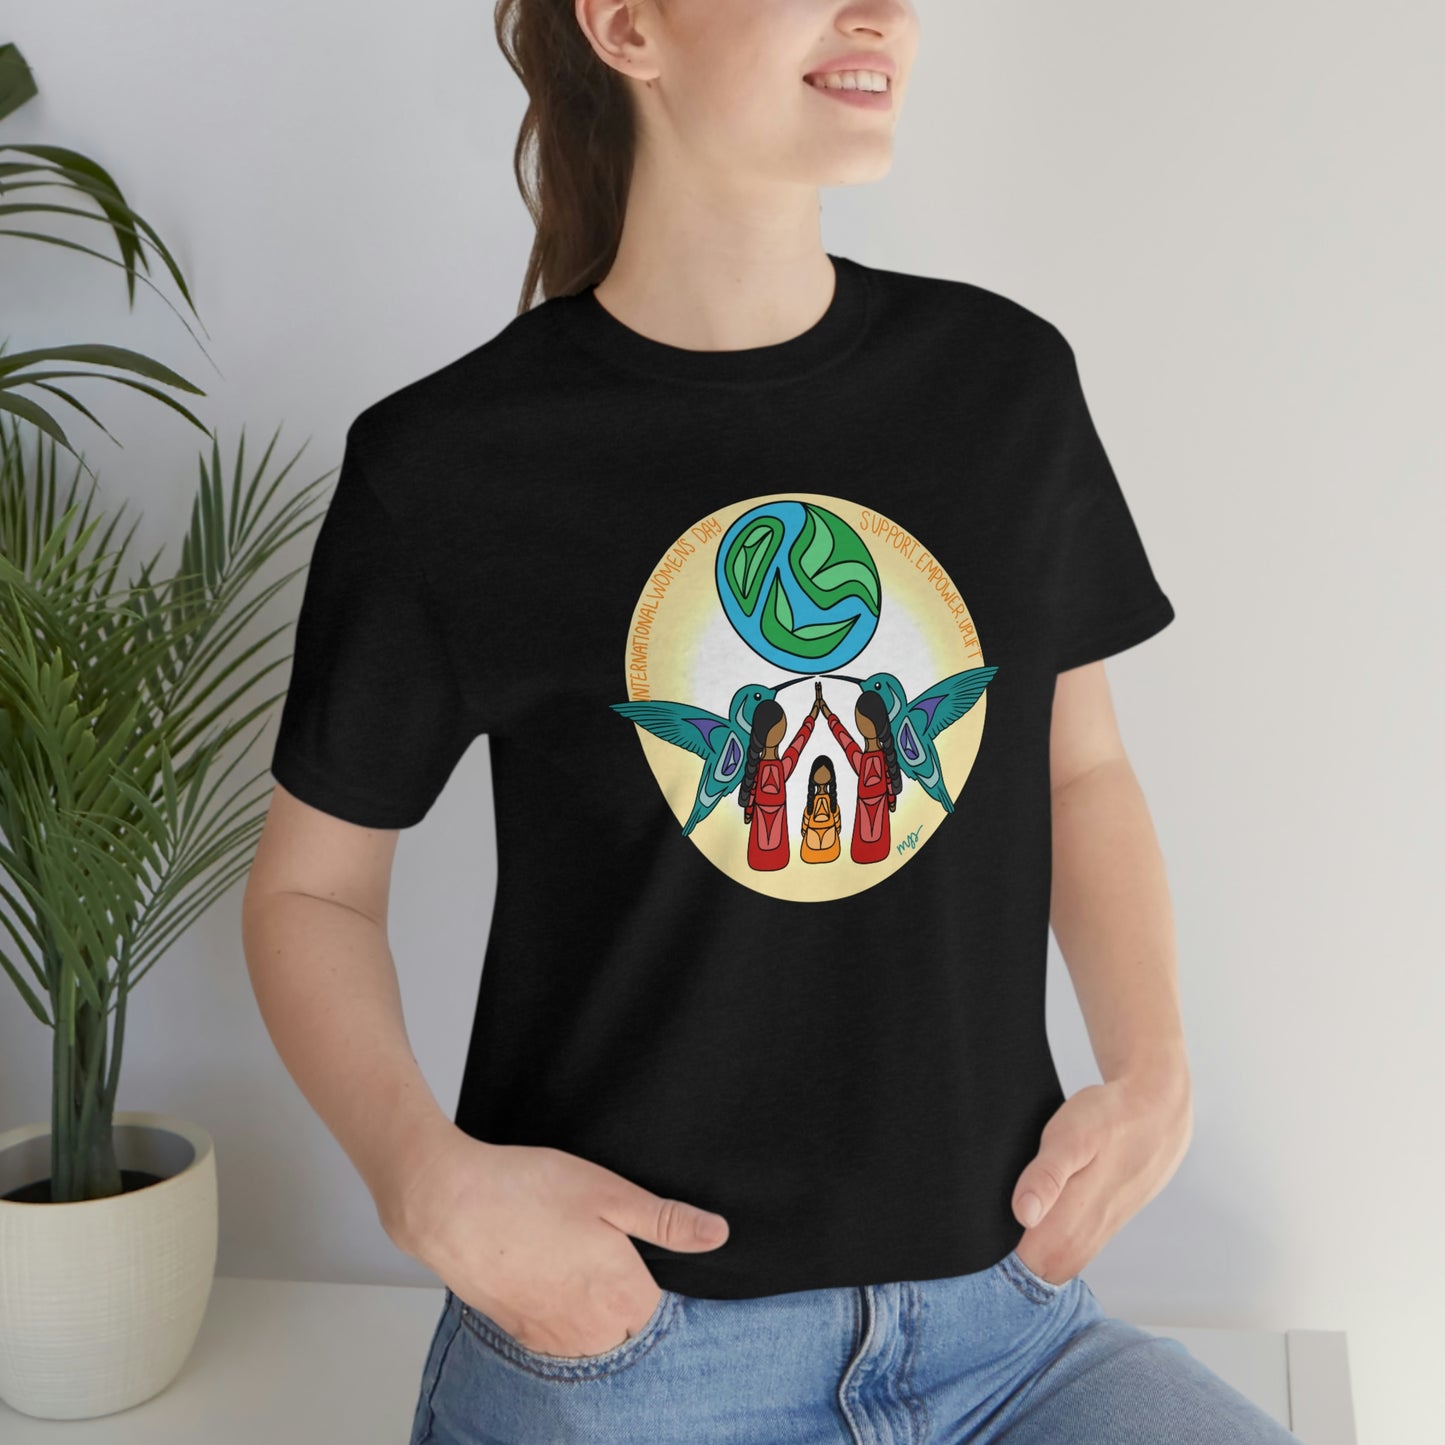 Indigenous Women Support Empower Uplift Design Coast Salish Women and Children Surrounded by Humming Birds